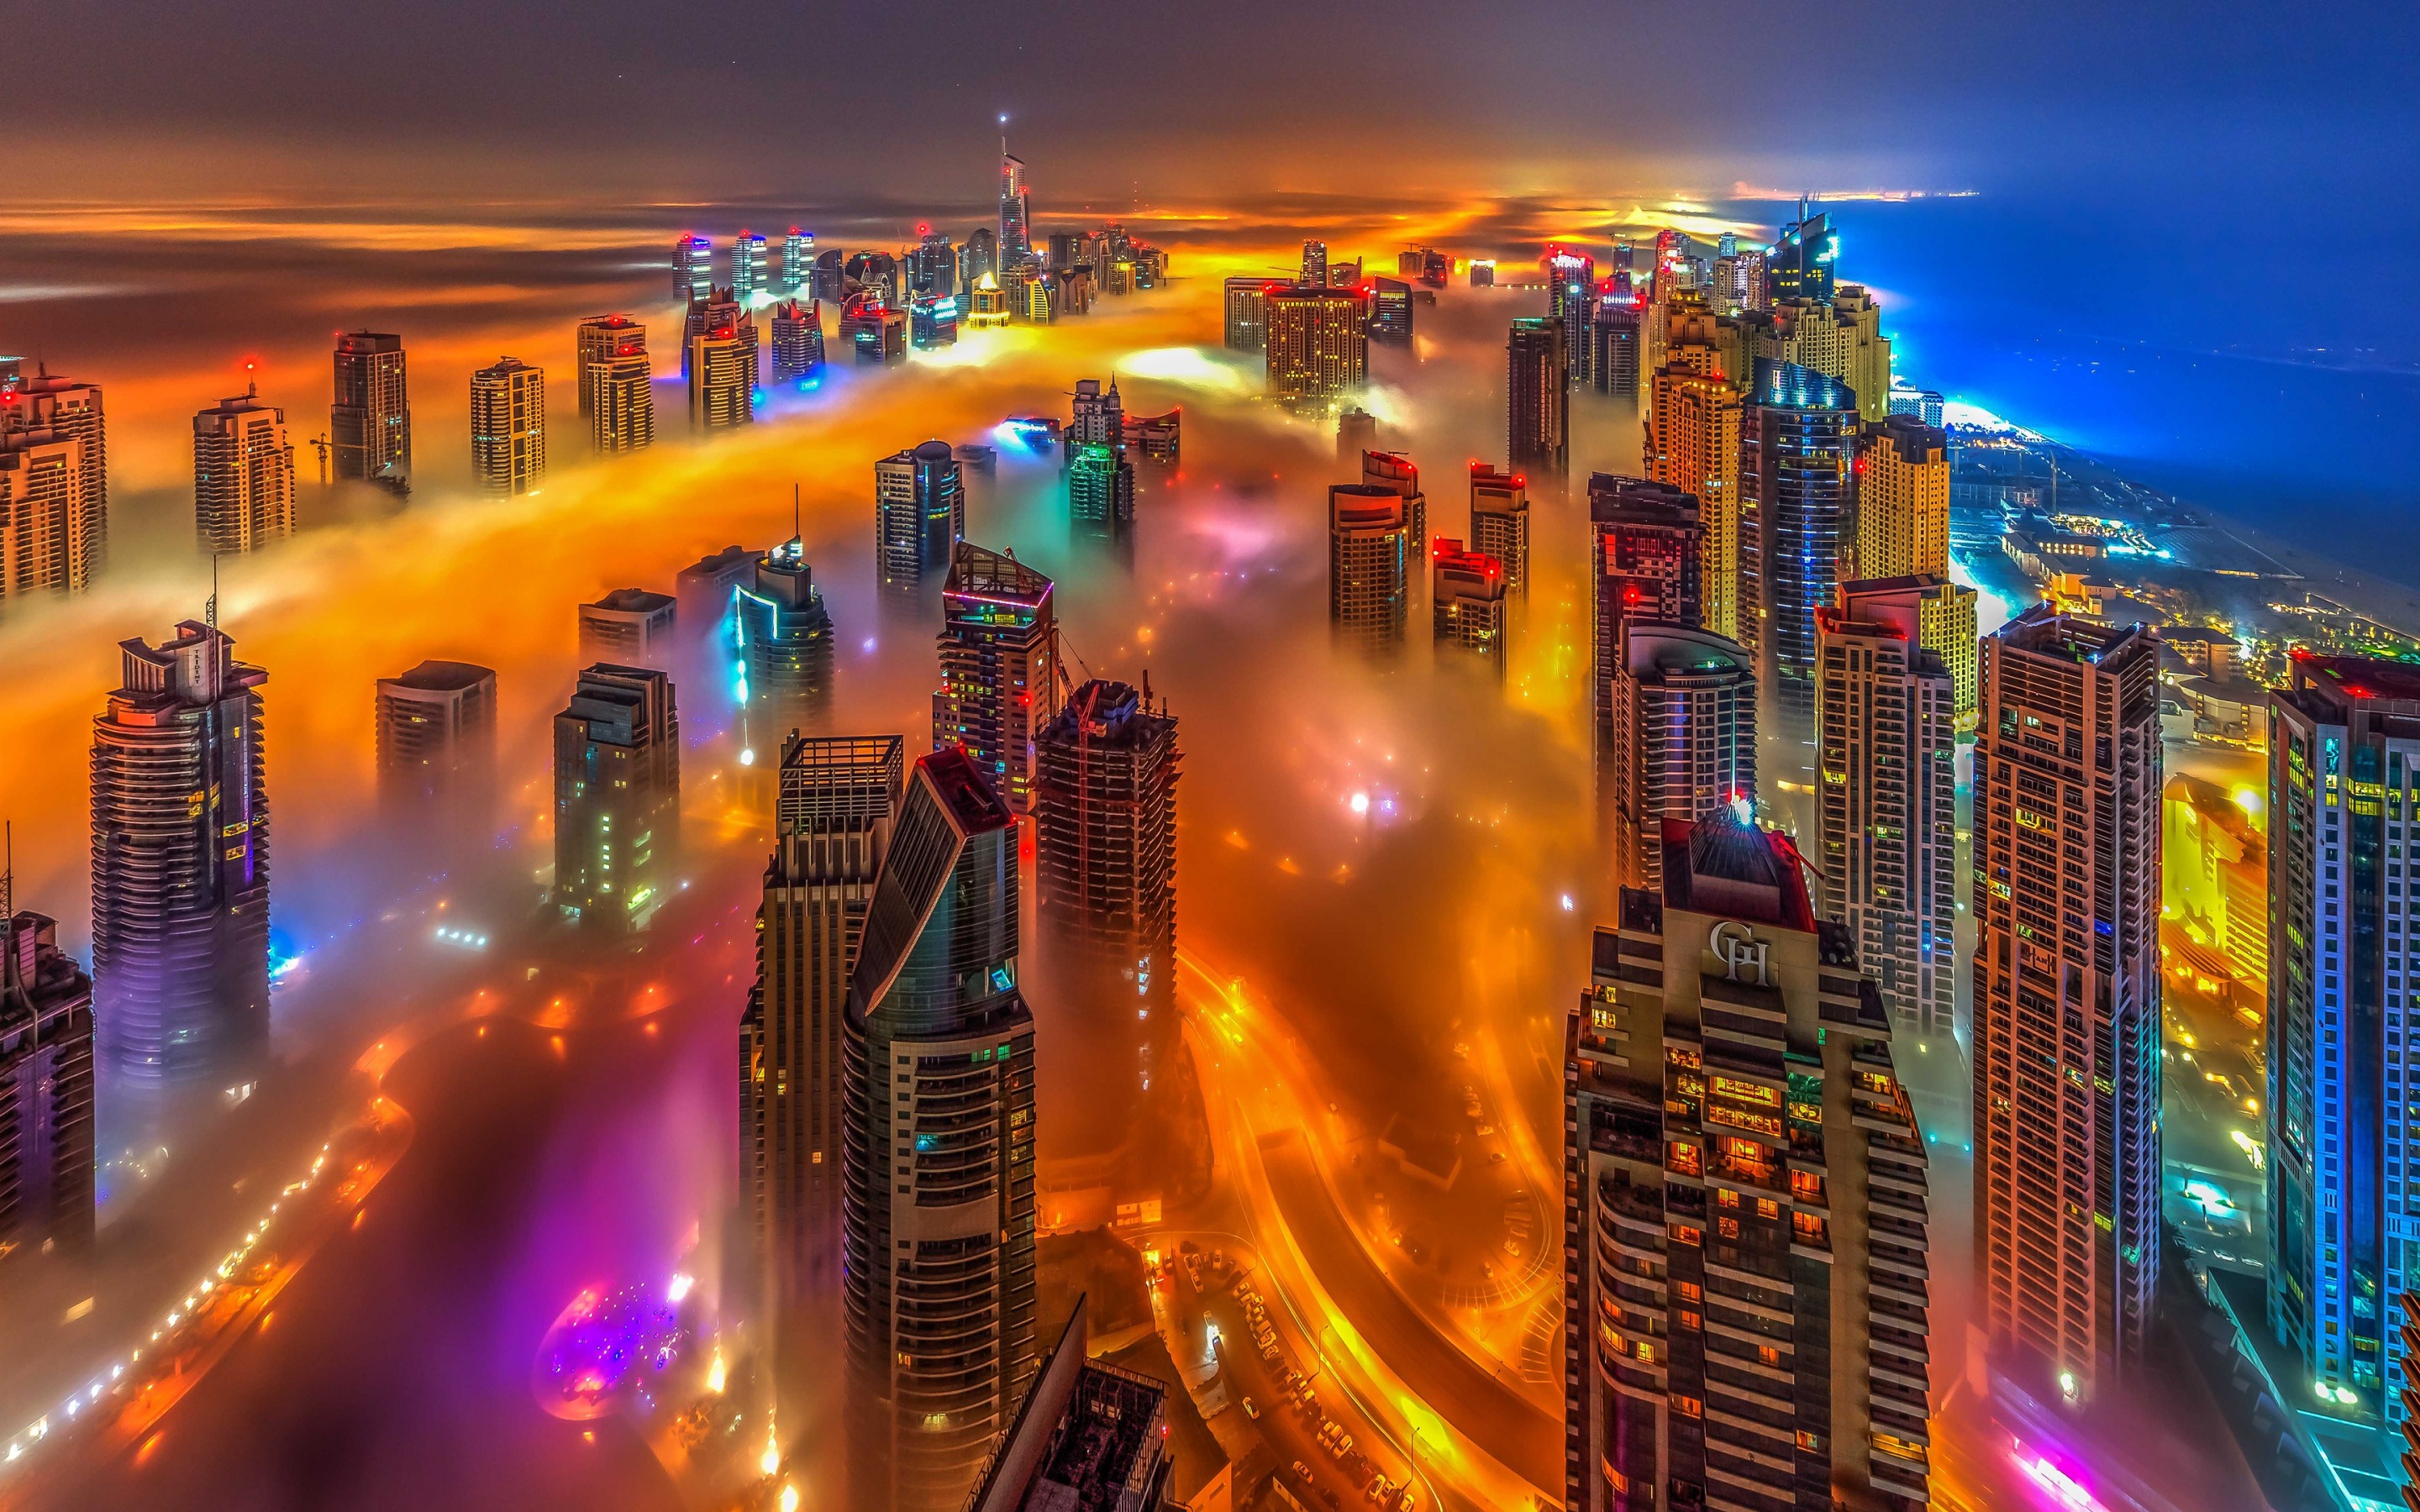 Download wallpaper Dubai, UAE, bright colored city lights, metropolis, skyscrapers above the clouds, night, modern architecture for desktop with resolution 2880x1800. High Quality HD picture wallpaper